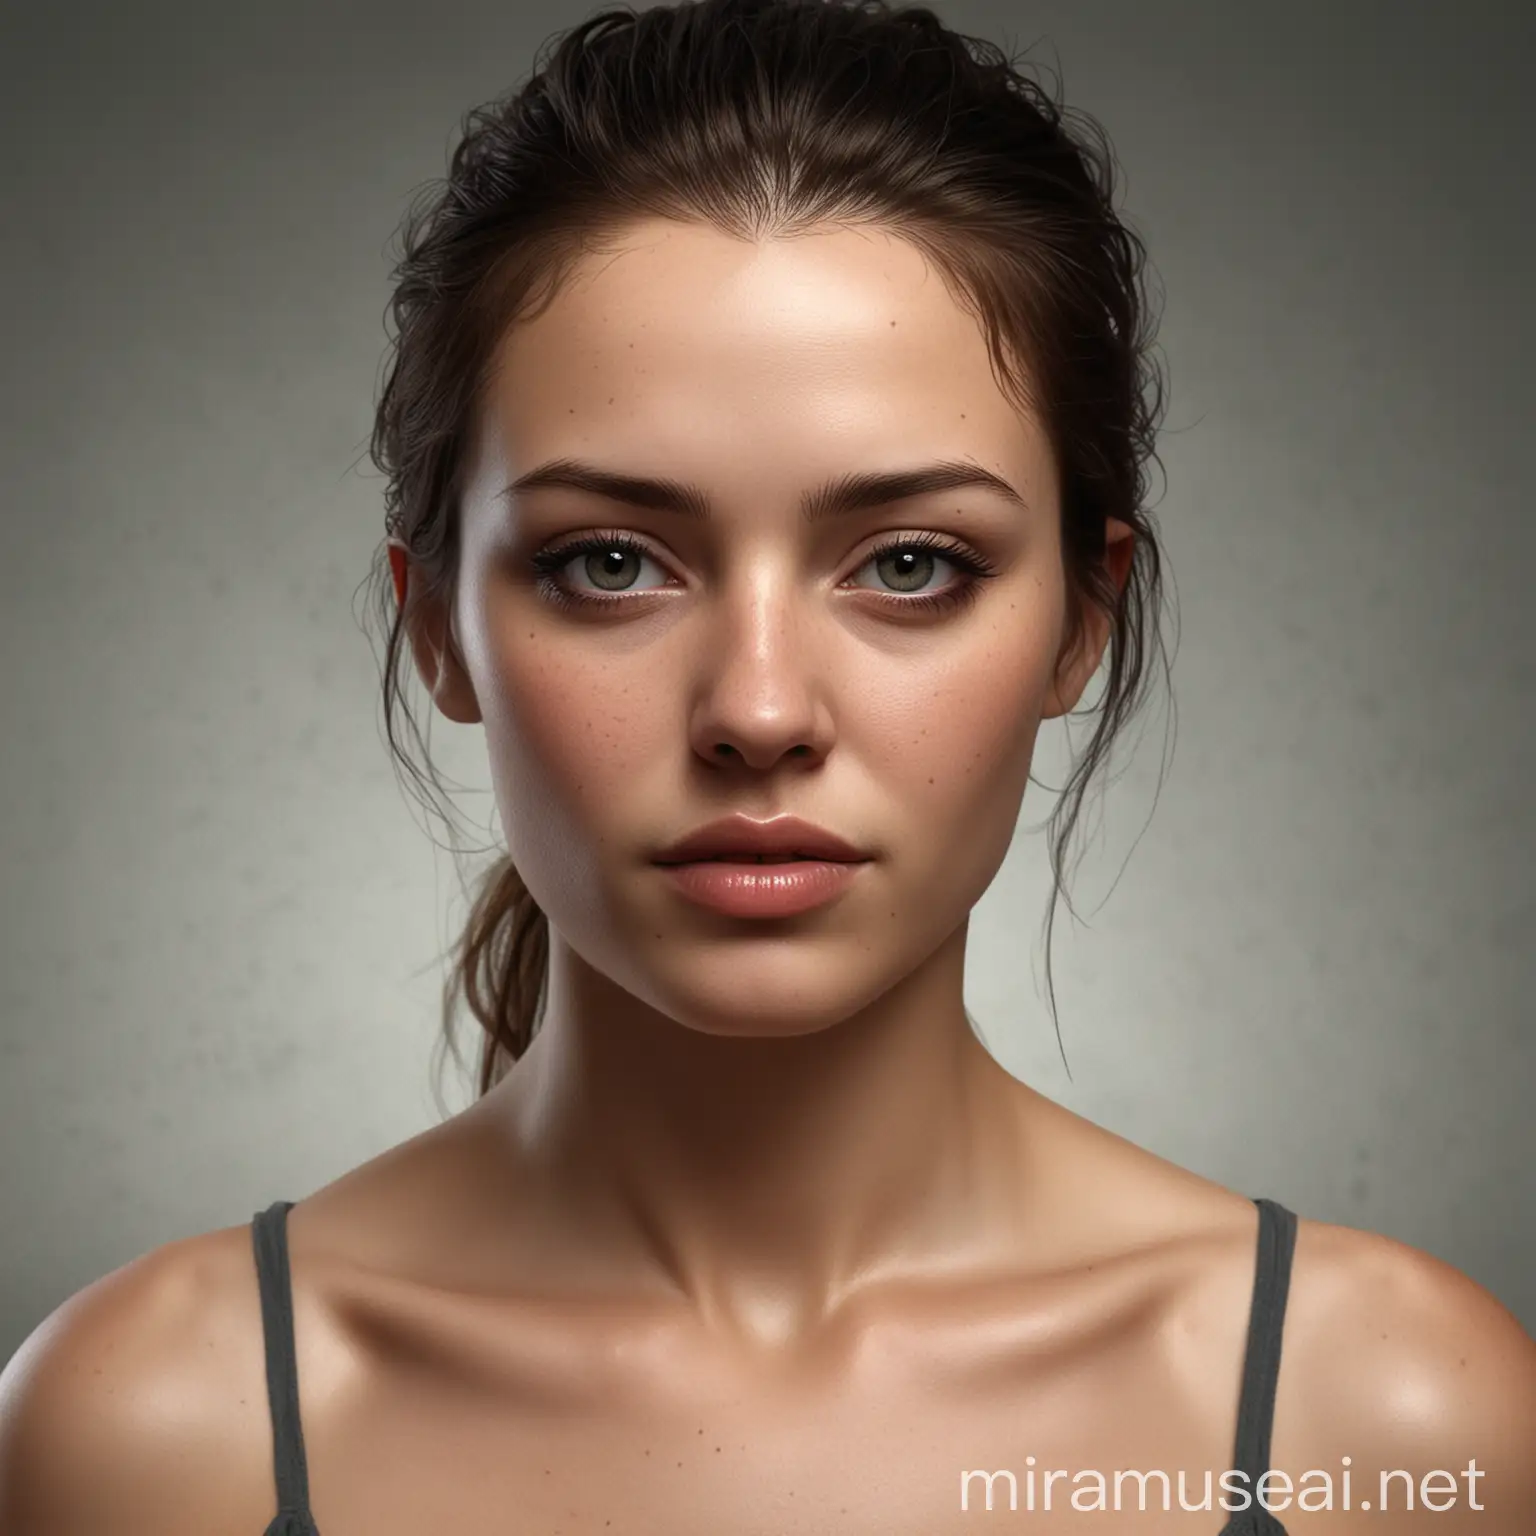 Realistic Portrait of a Woman with Expressive Eyes and Flowing Hair